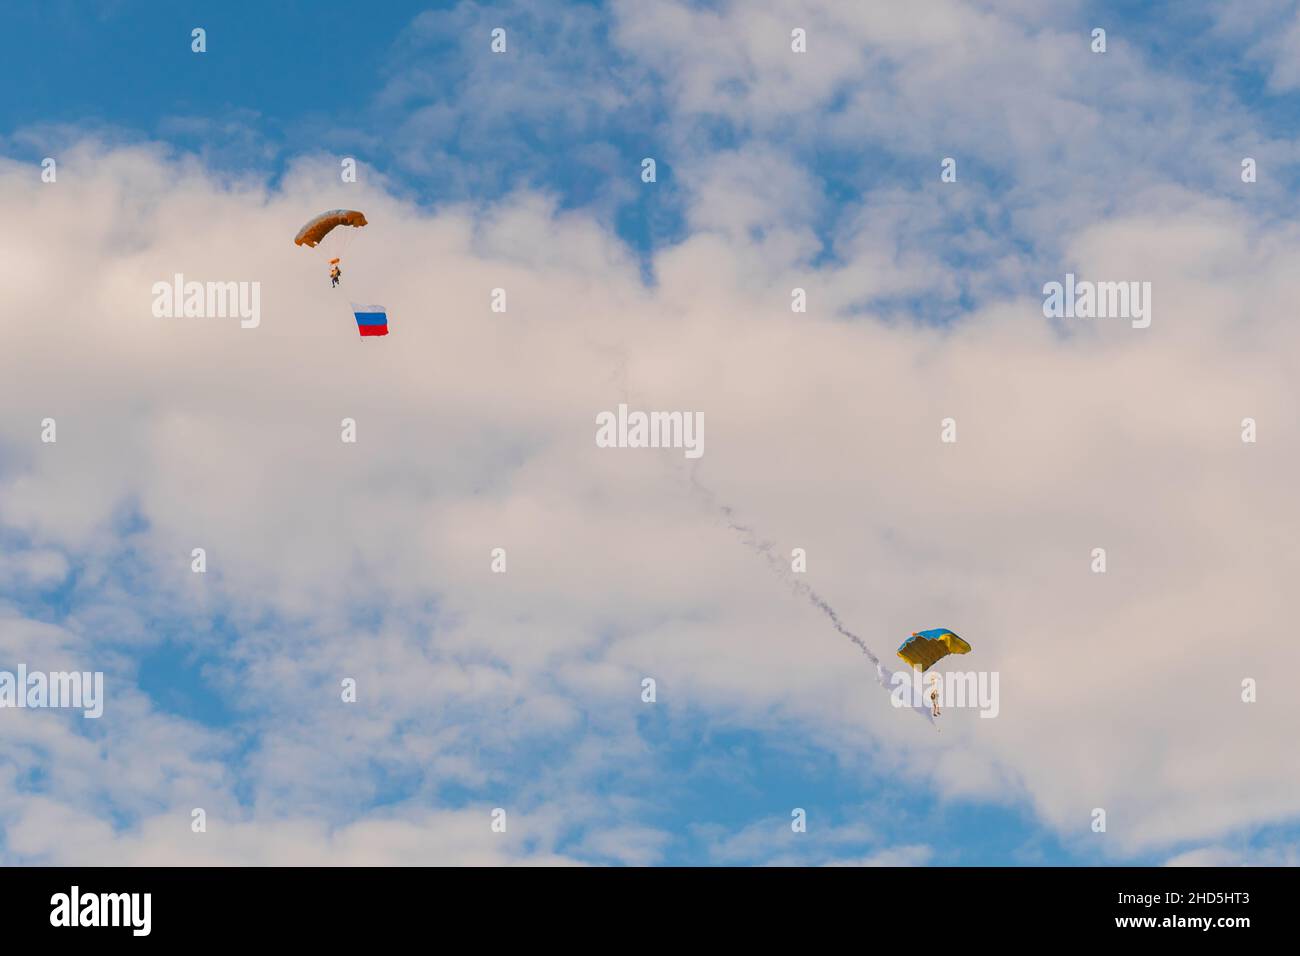 Two skydivers flying with parachute against blue sky - extreme sport concept Stock Photo